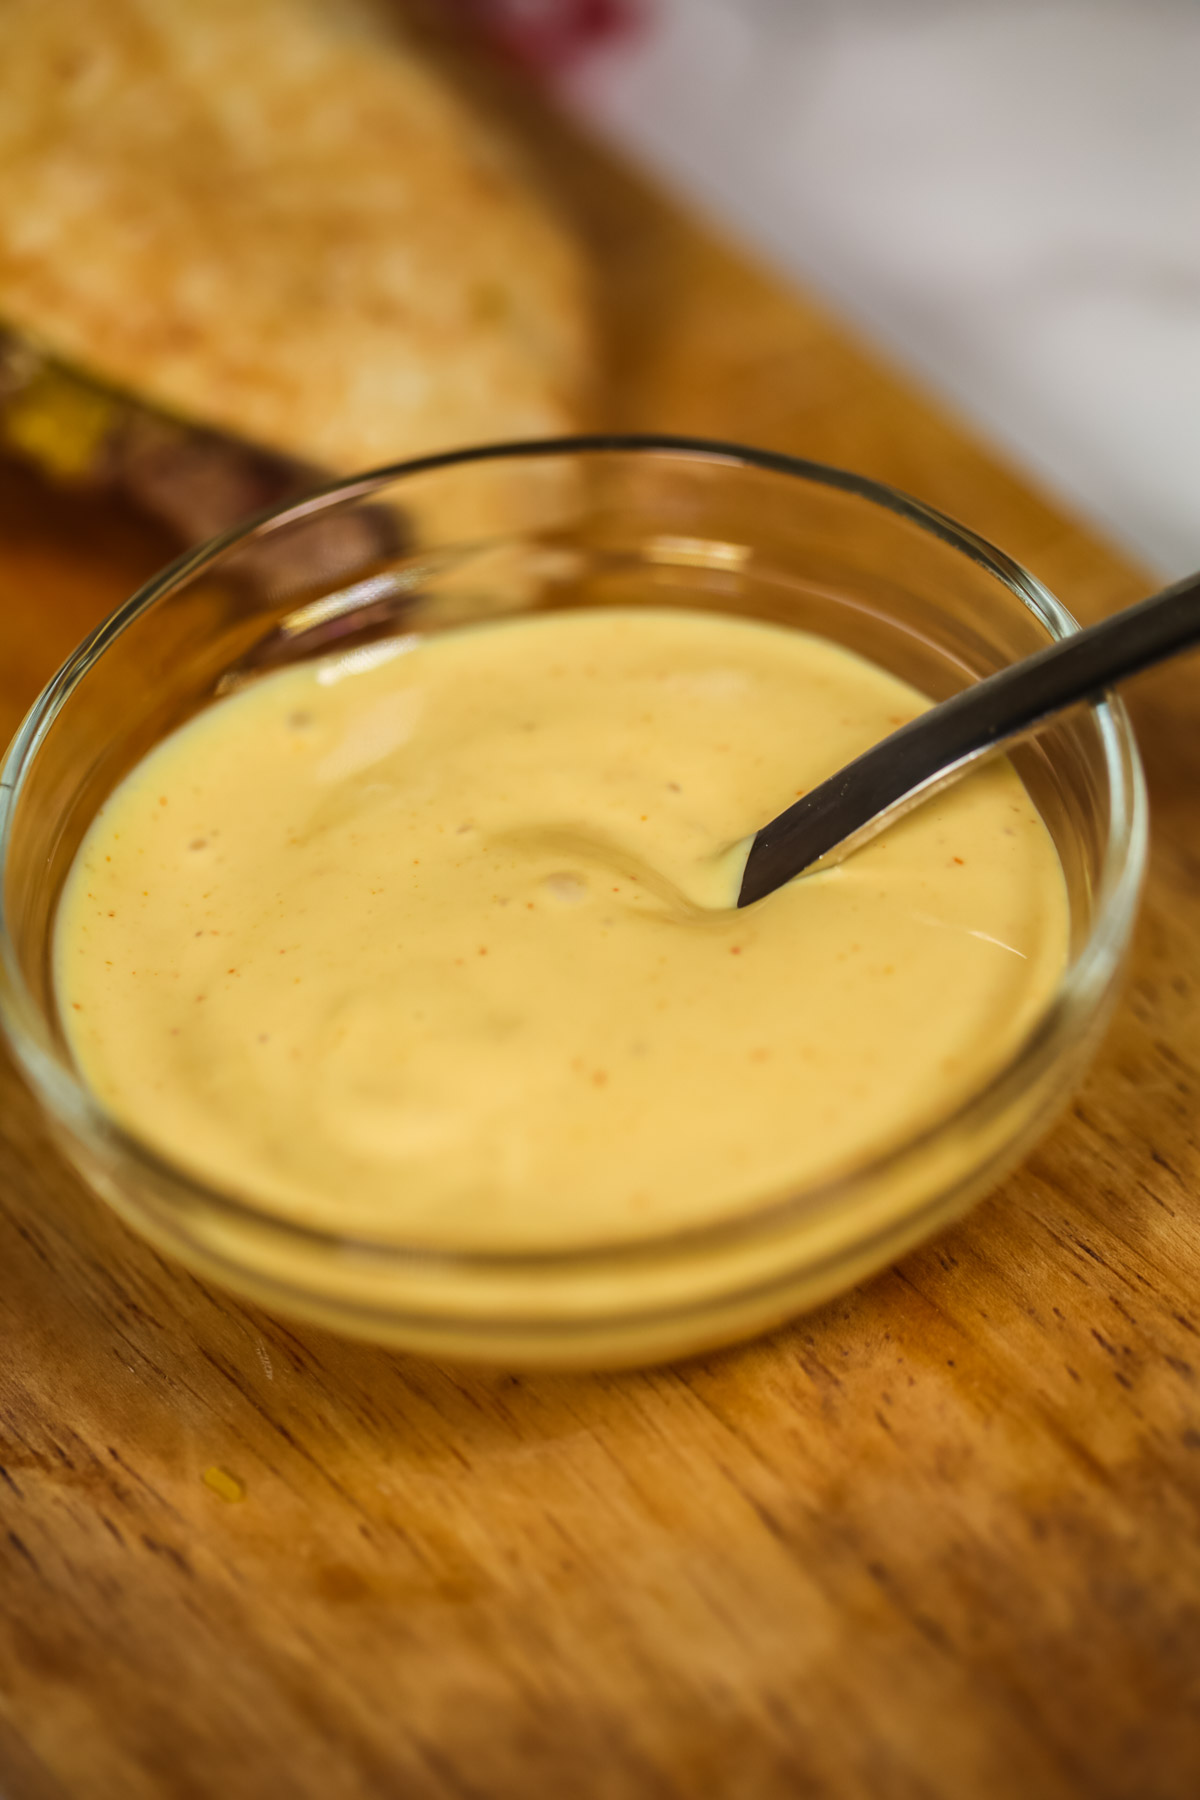  Best Burger Sauce in a clear bowl with a spoon.